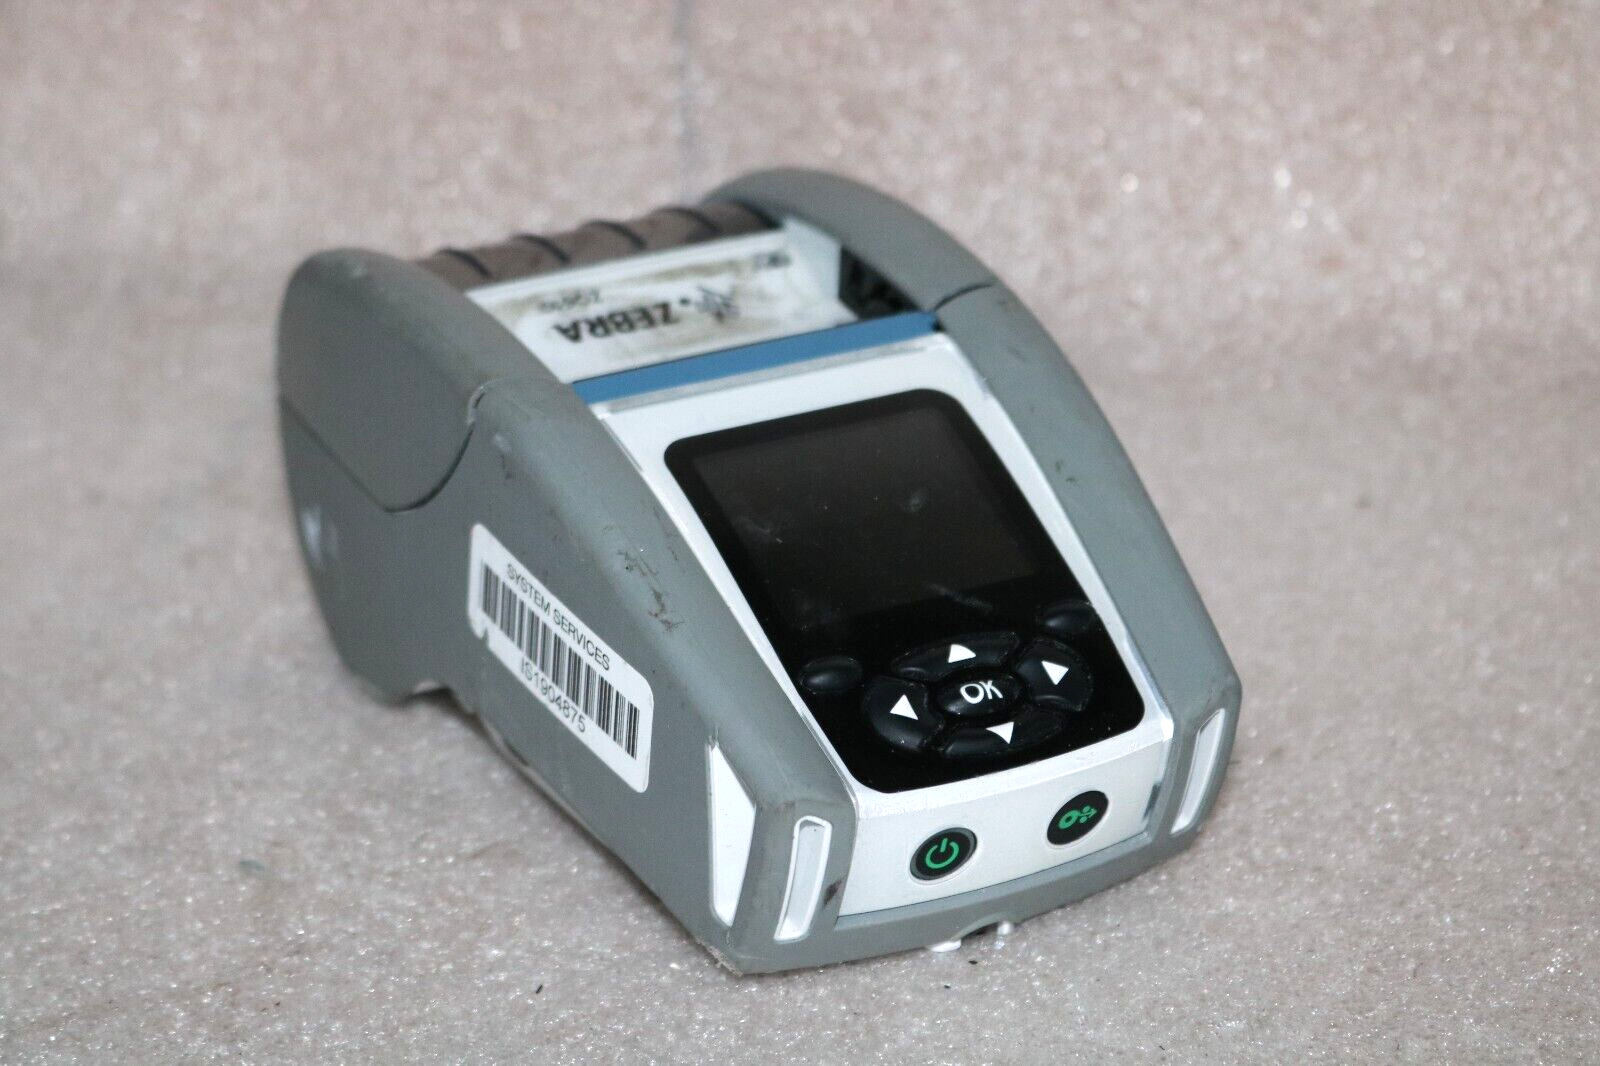 Zebra ZQ610 Portable Barcode Thermal Printer Wireless Bluetooth USB, Pre-Owned .